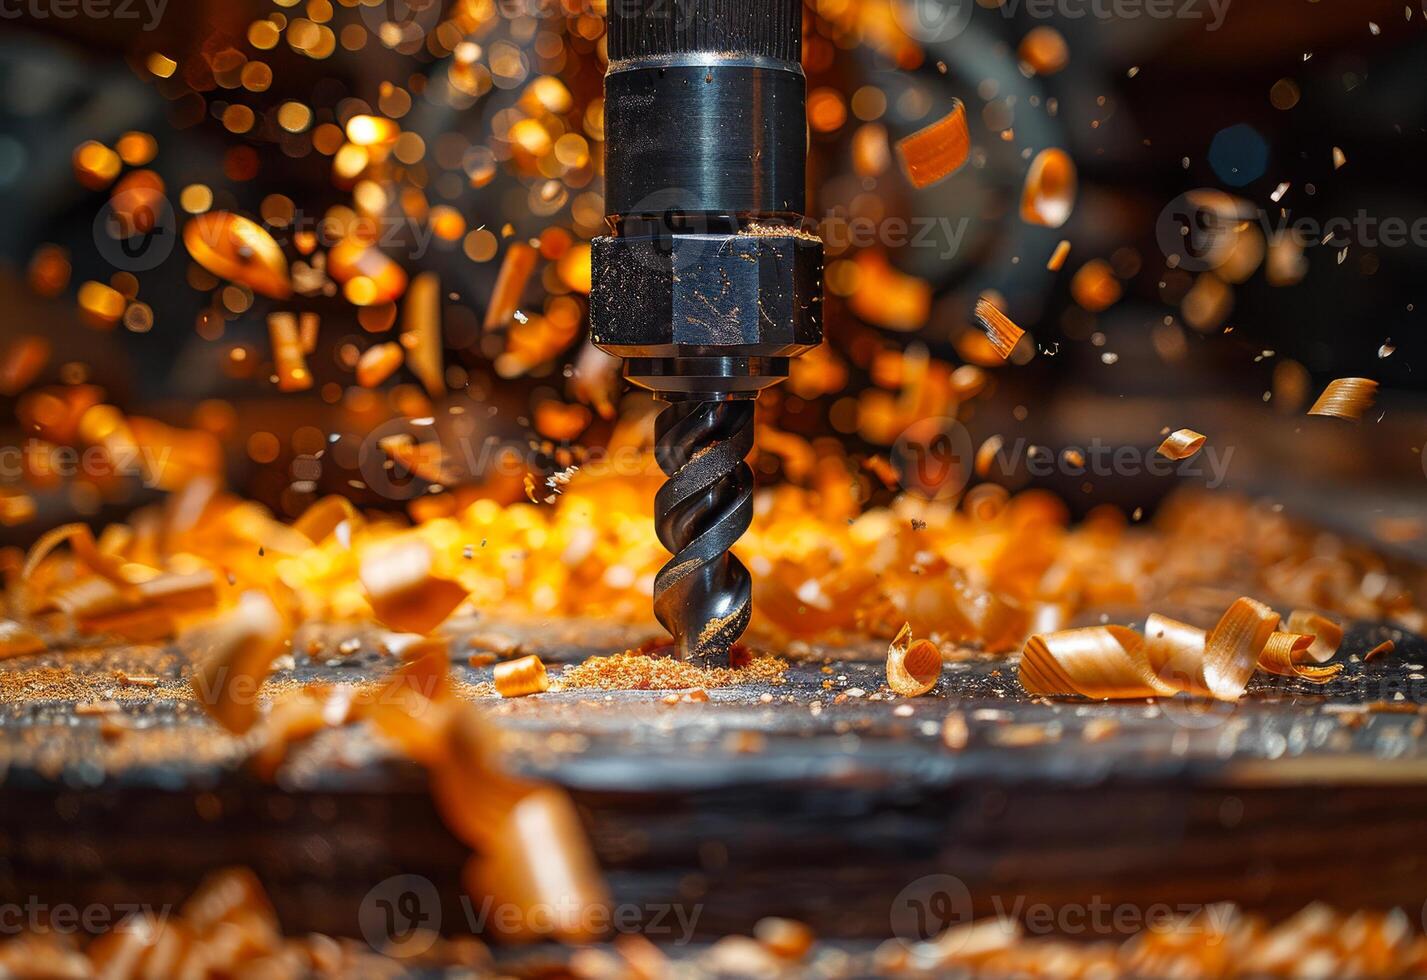 AI generated Drill is drilling into piece of wood. A black drill bit is spinning and chiseling wood photo